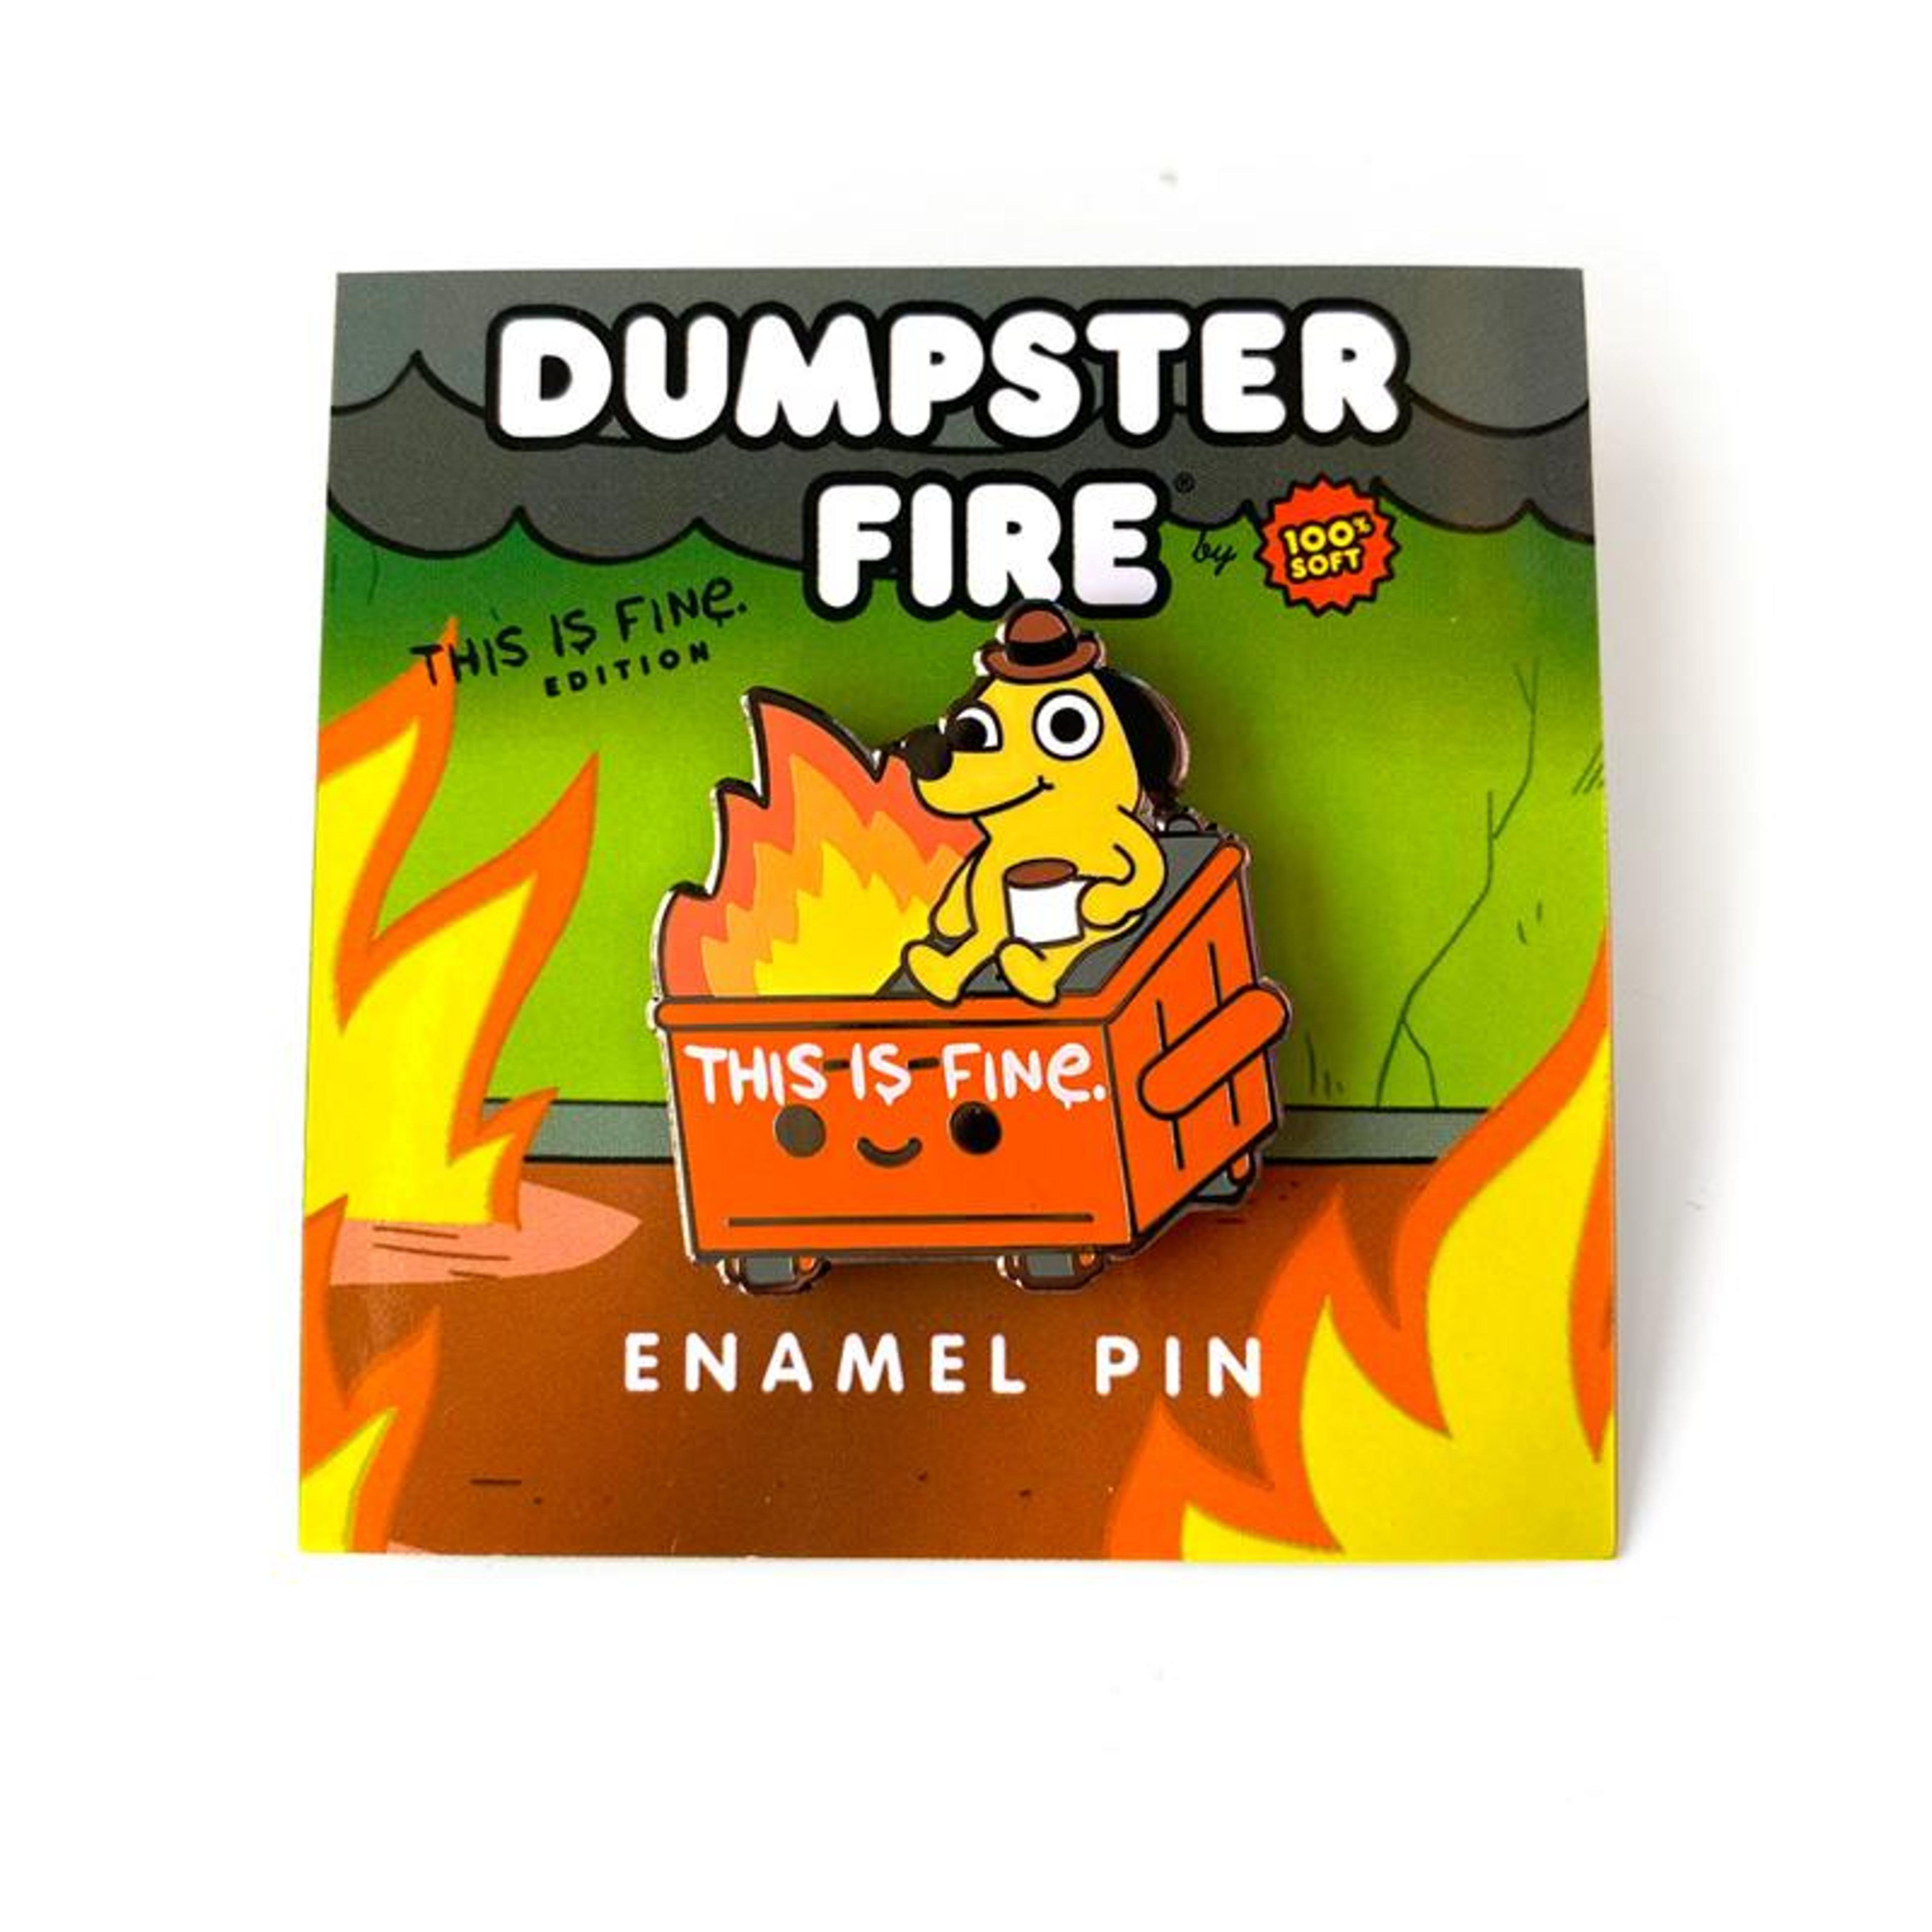 100% Soft This is Fine Dumpster Fire Enamel Pin